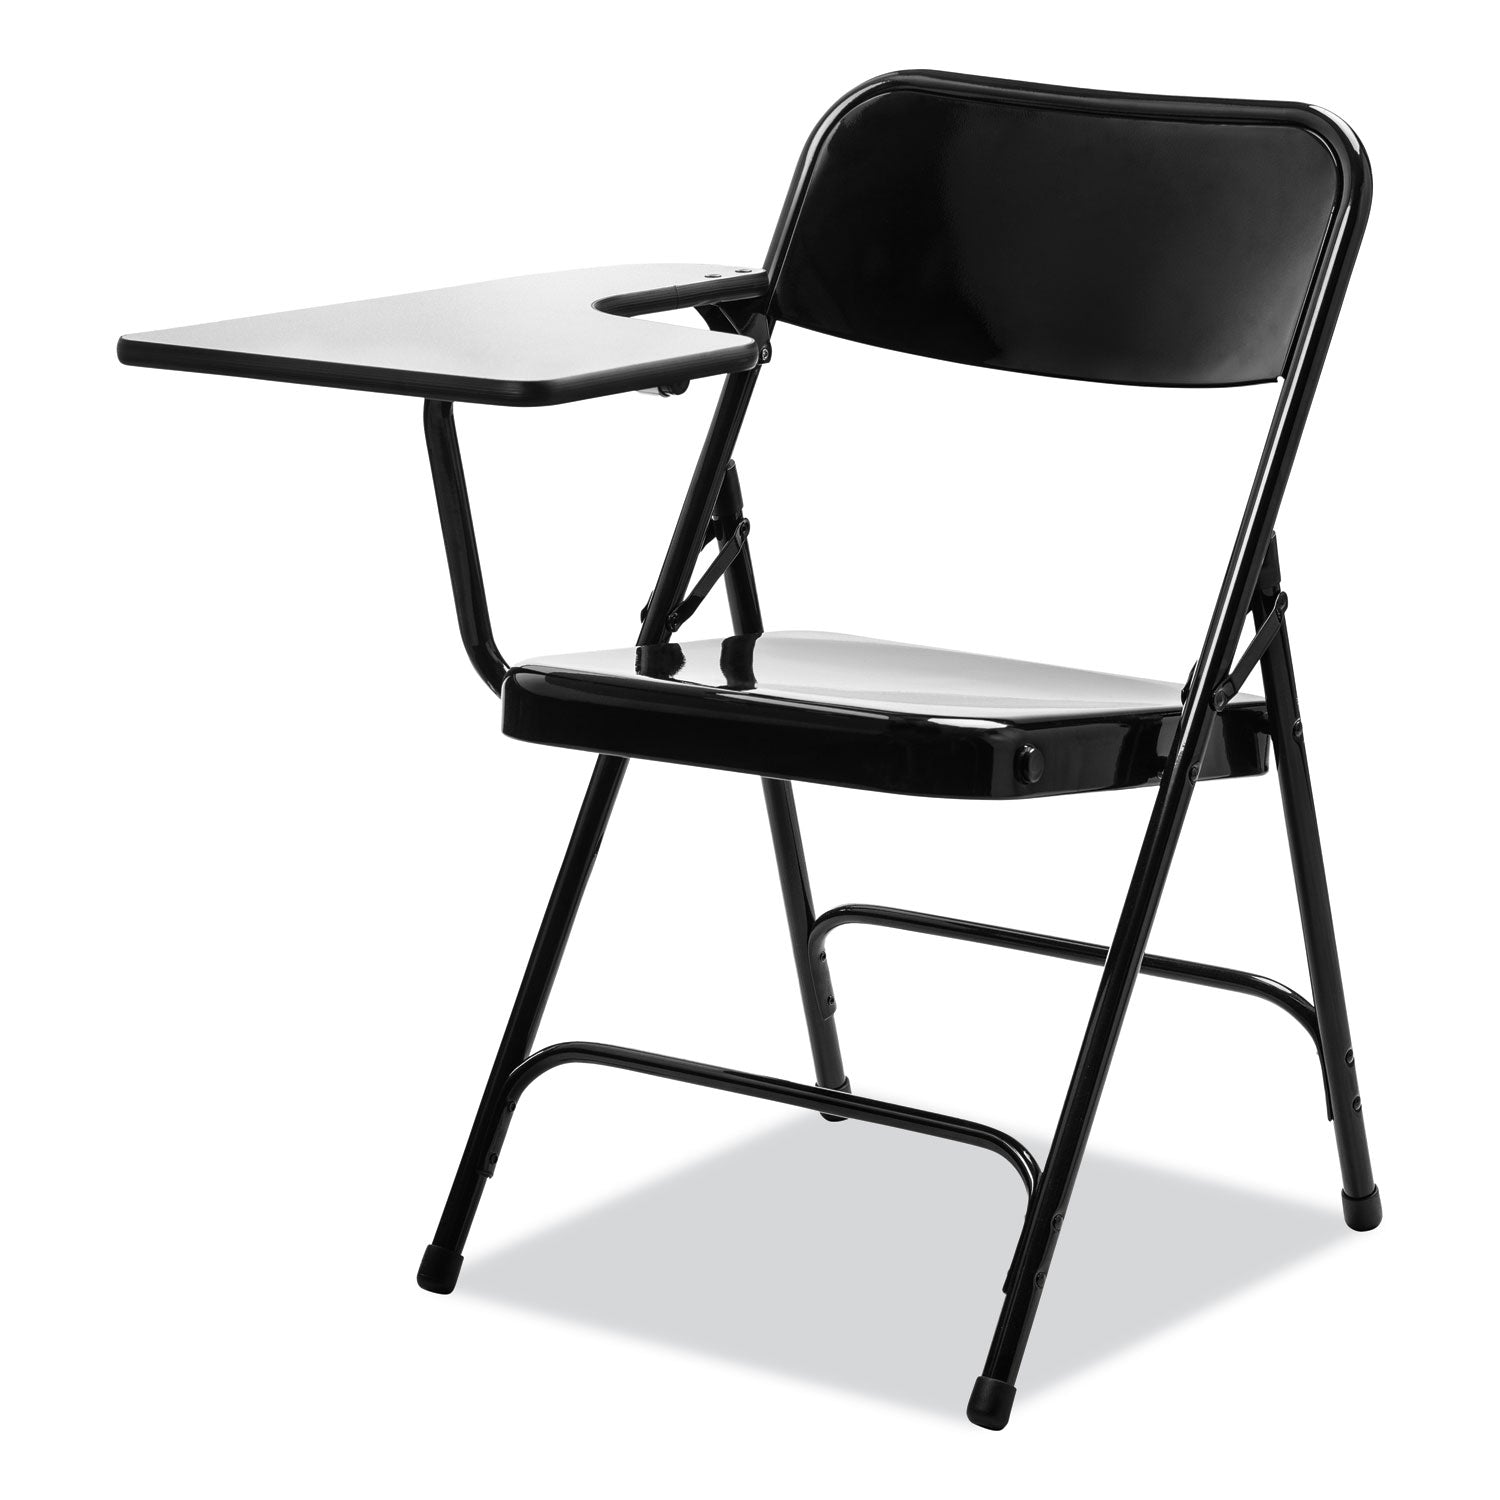 5200-series-right-side-tablet-arm-folding-chair-supports-up-to-480-lb-1725-seat-height-black-2-ctships-in-1-3-bus-days_nps5210r - 3